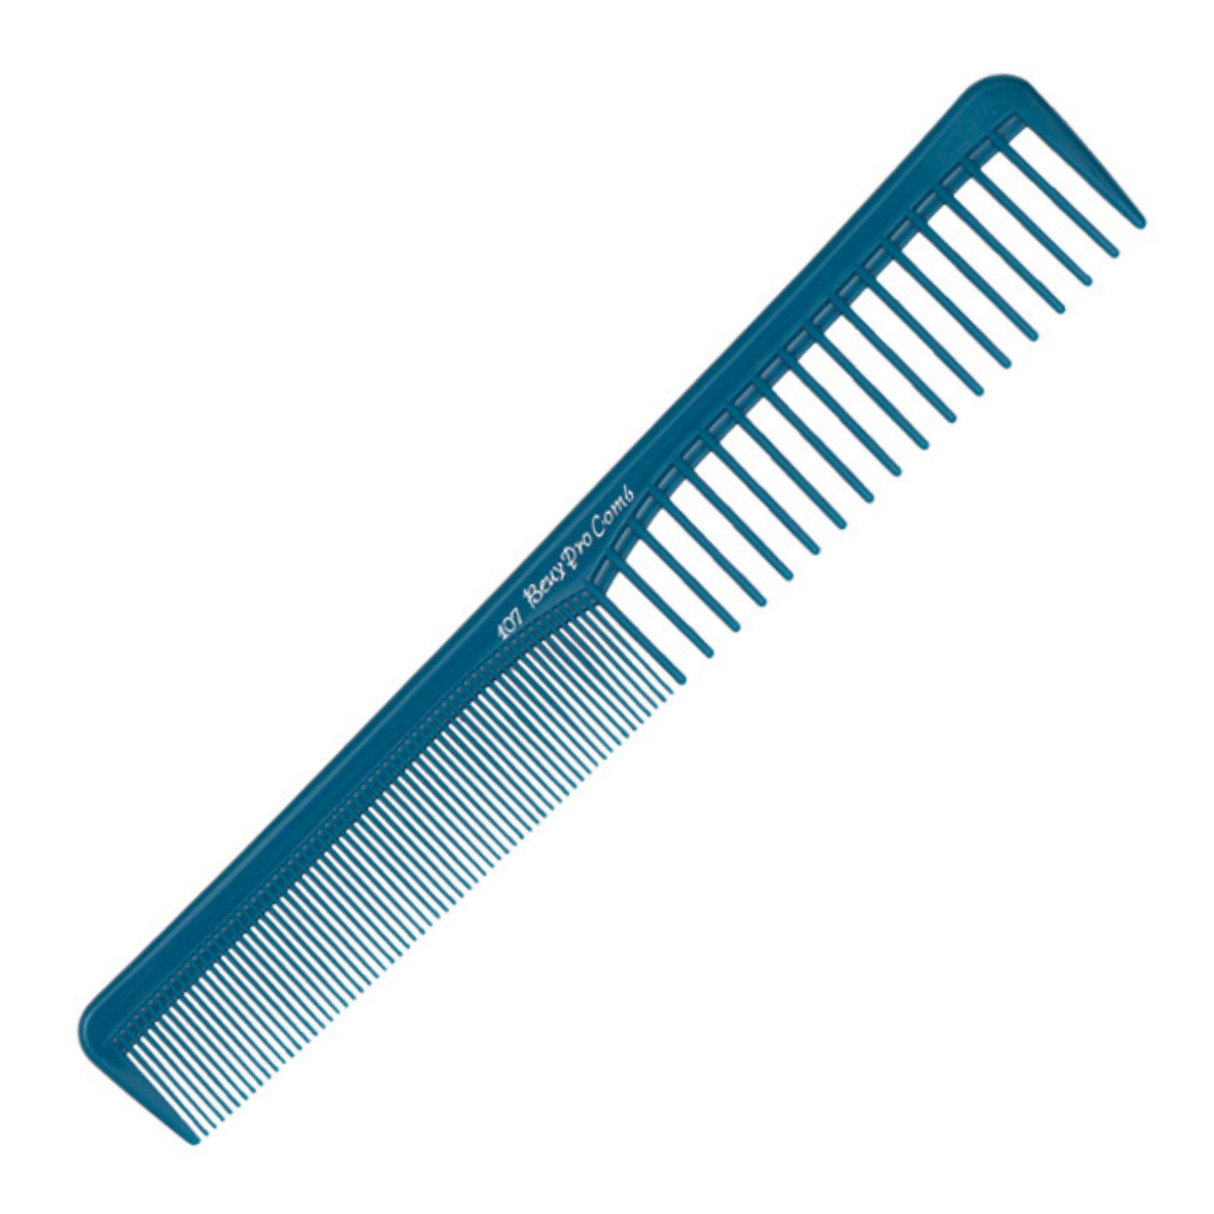 Beuy Pro Cutting Comb #107 - Blue